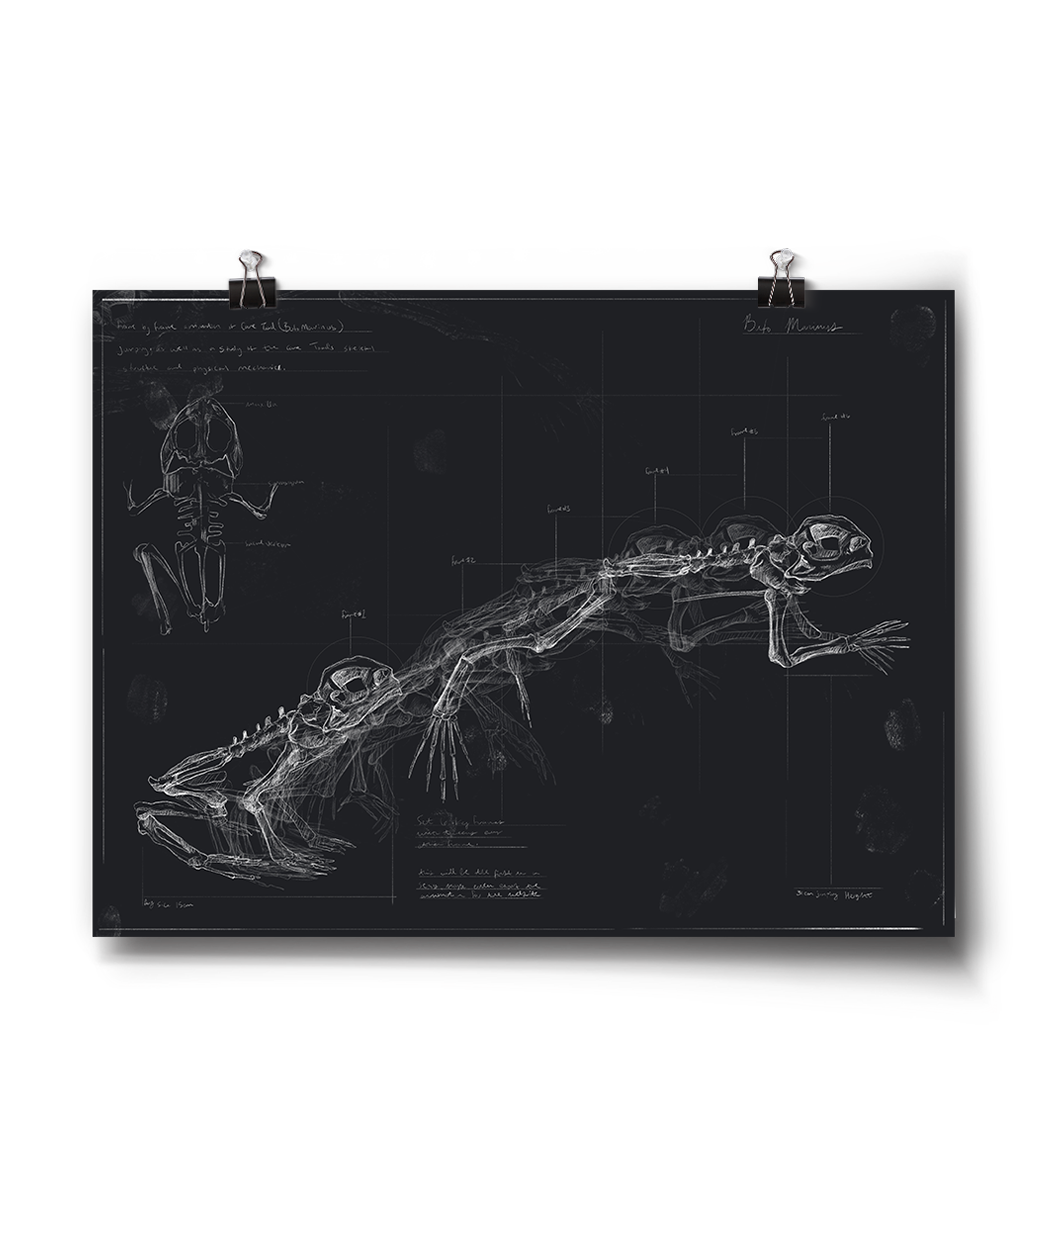 Horizontal print of a line drawing of a frog in different poses against a black background - from Tyler Thrasher